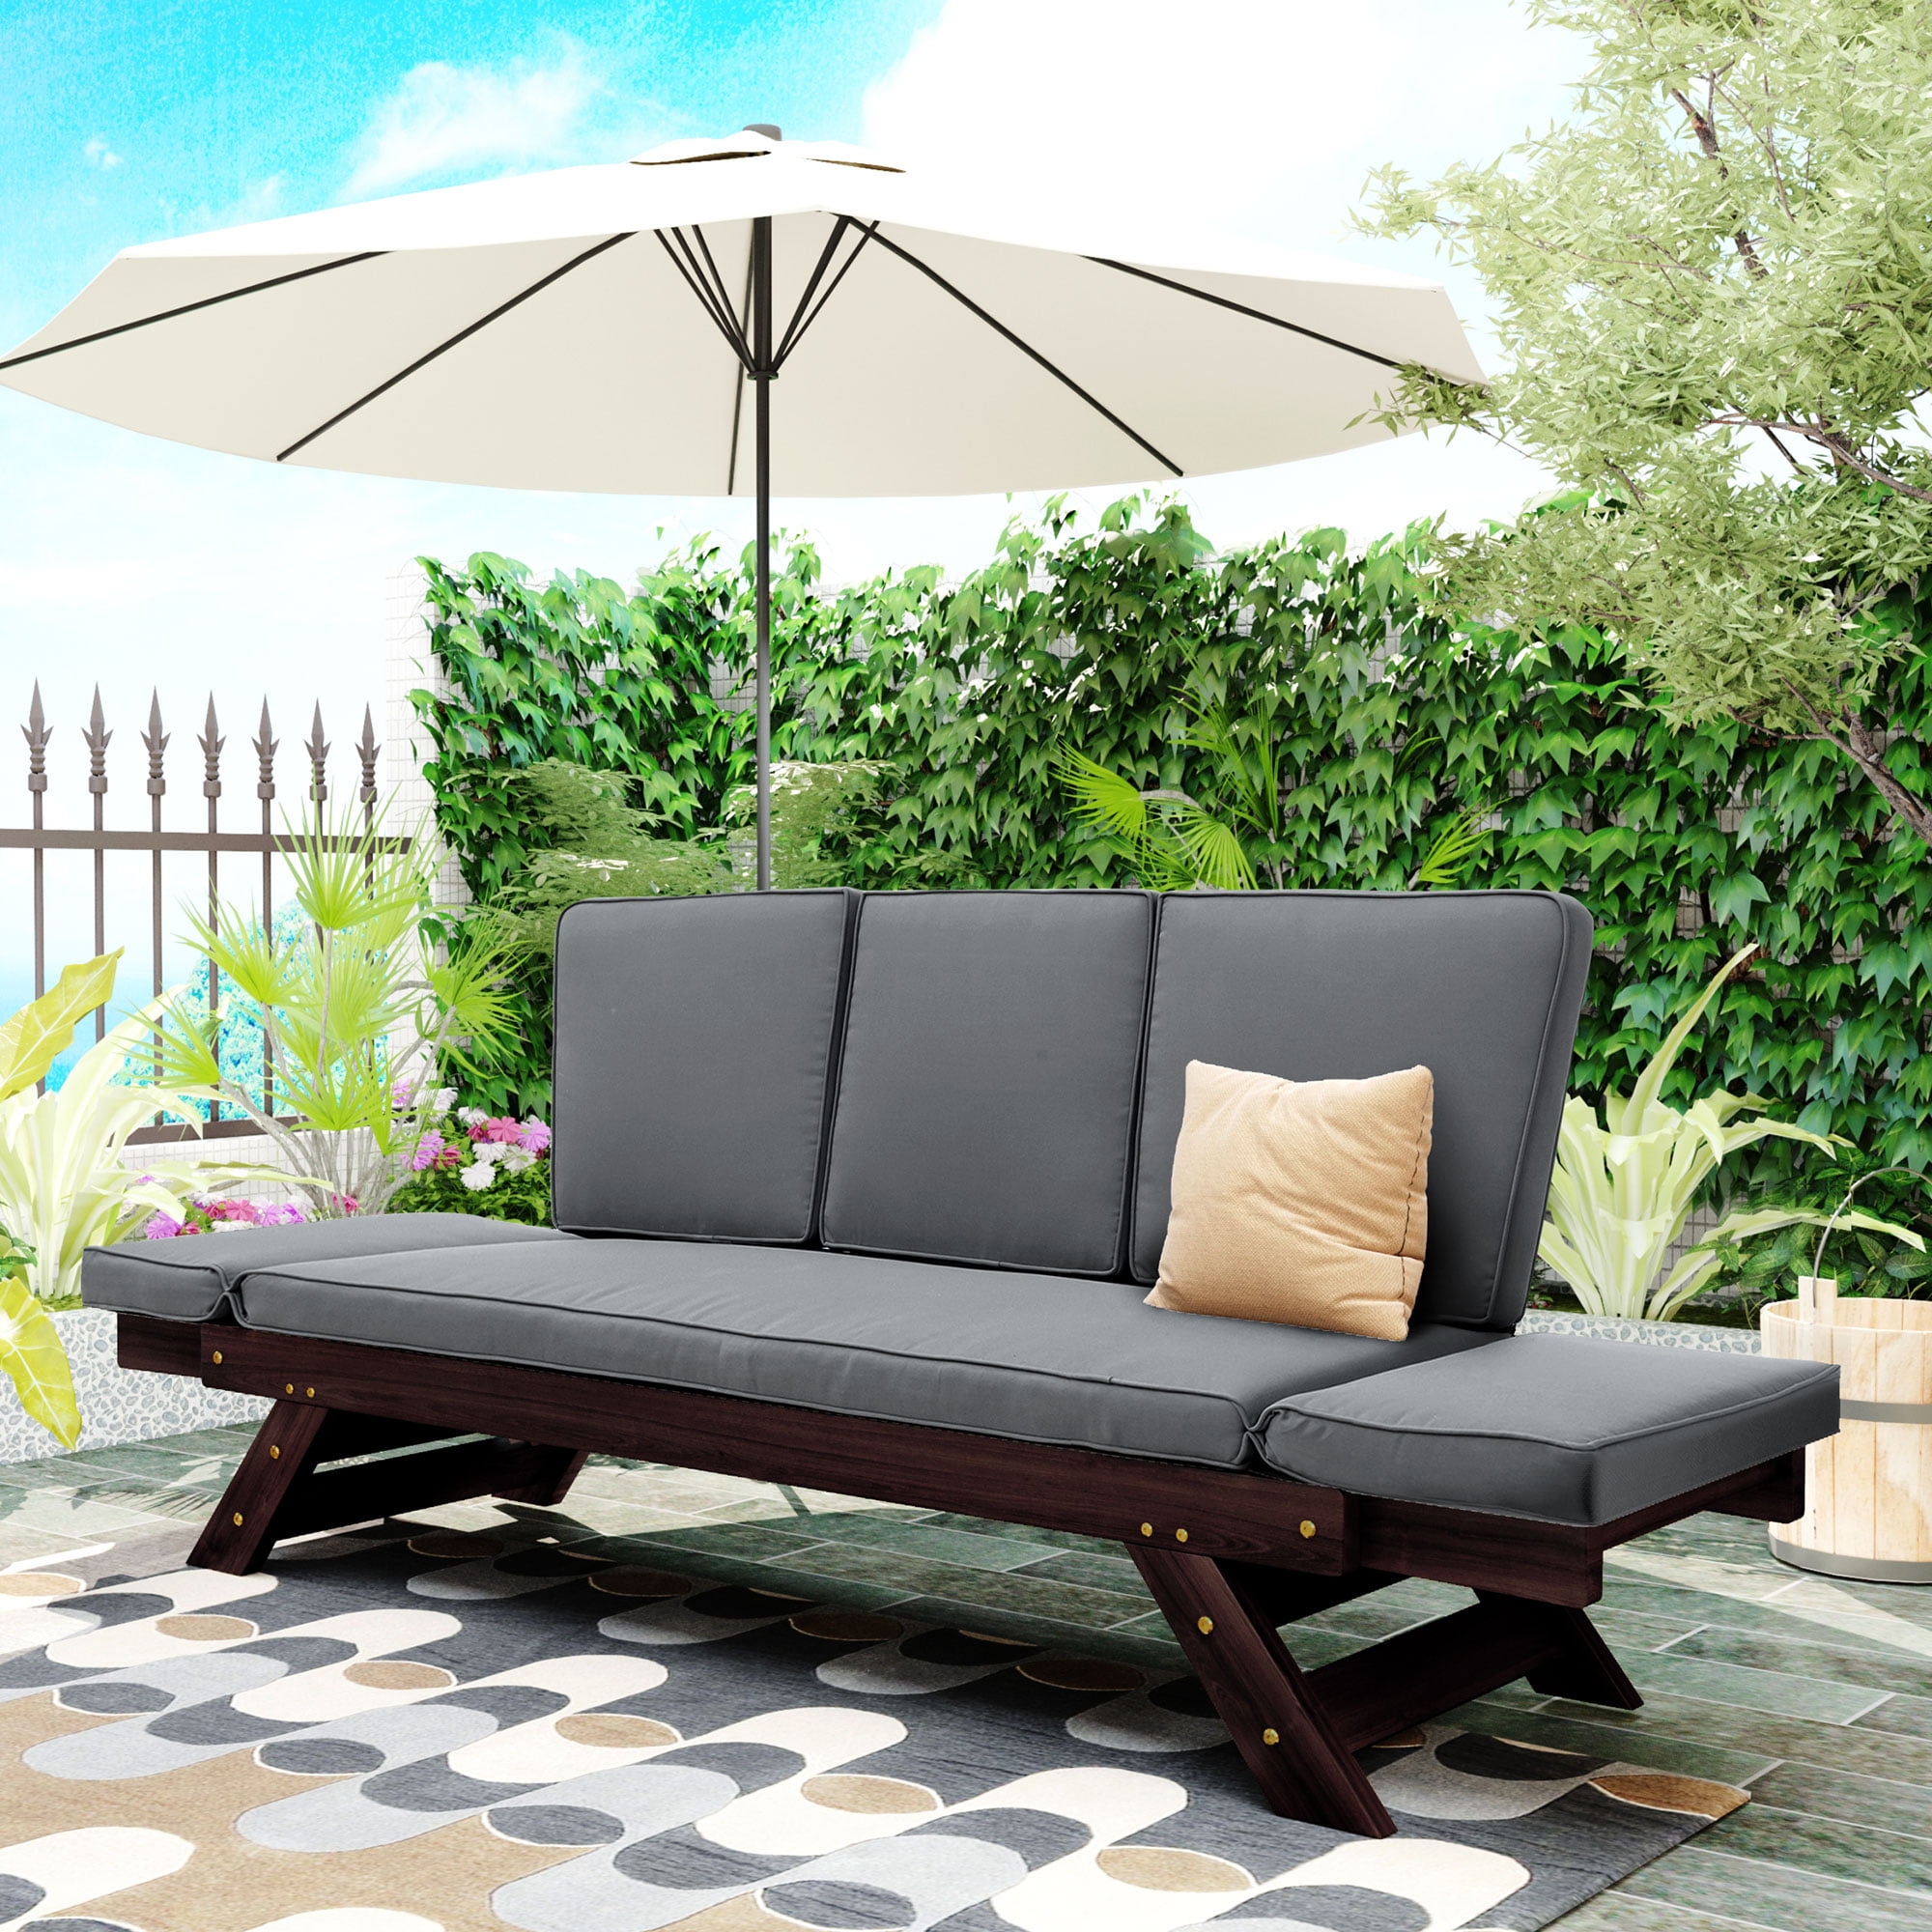 enz Vermelden Maak een naam Wood Patio Convertible Couch Sofa Bed with Adjustable Armrest, Outdoor  Daybed Convertible Chaise Lounger Sofa Bed for Porch Courtyard Poolside -  Walmart.com